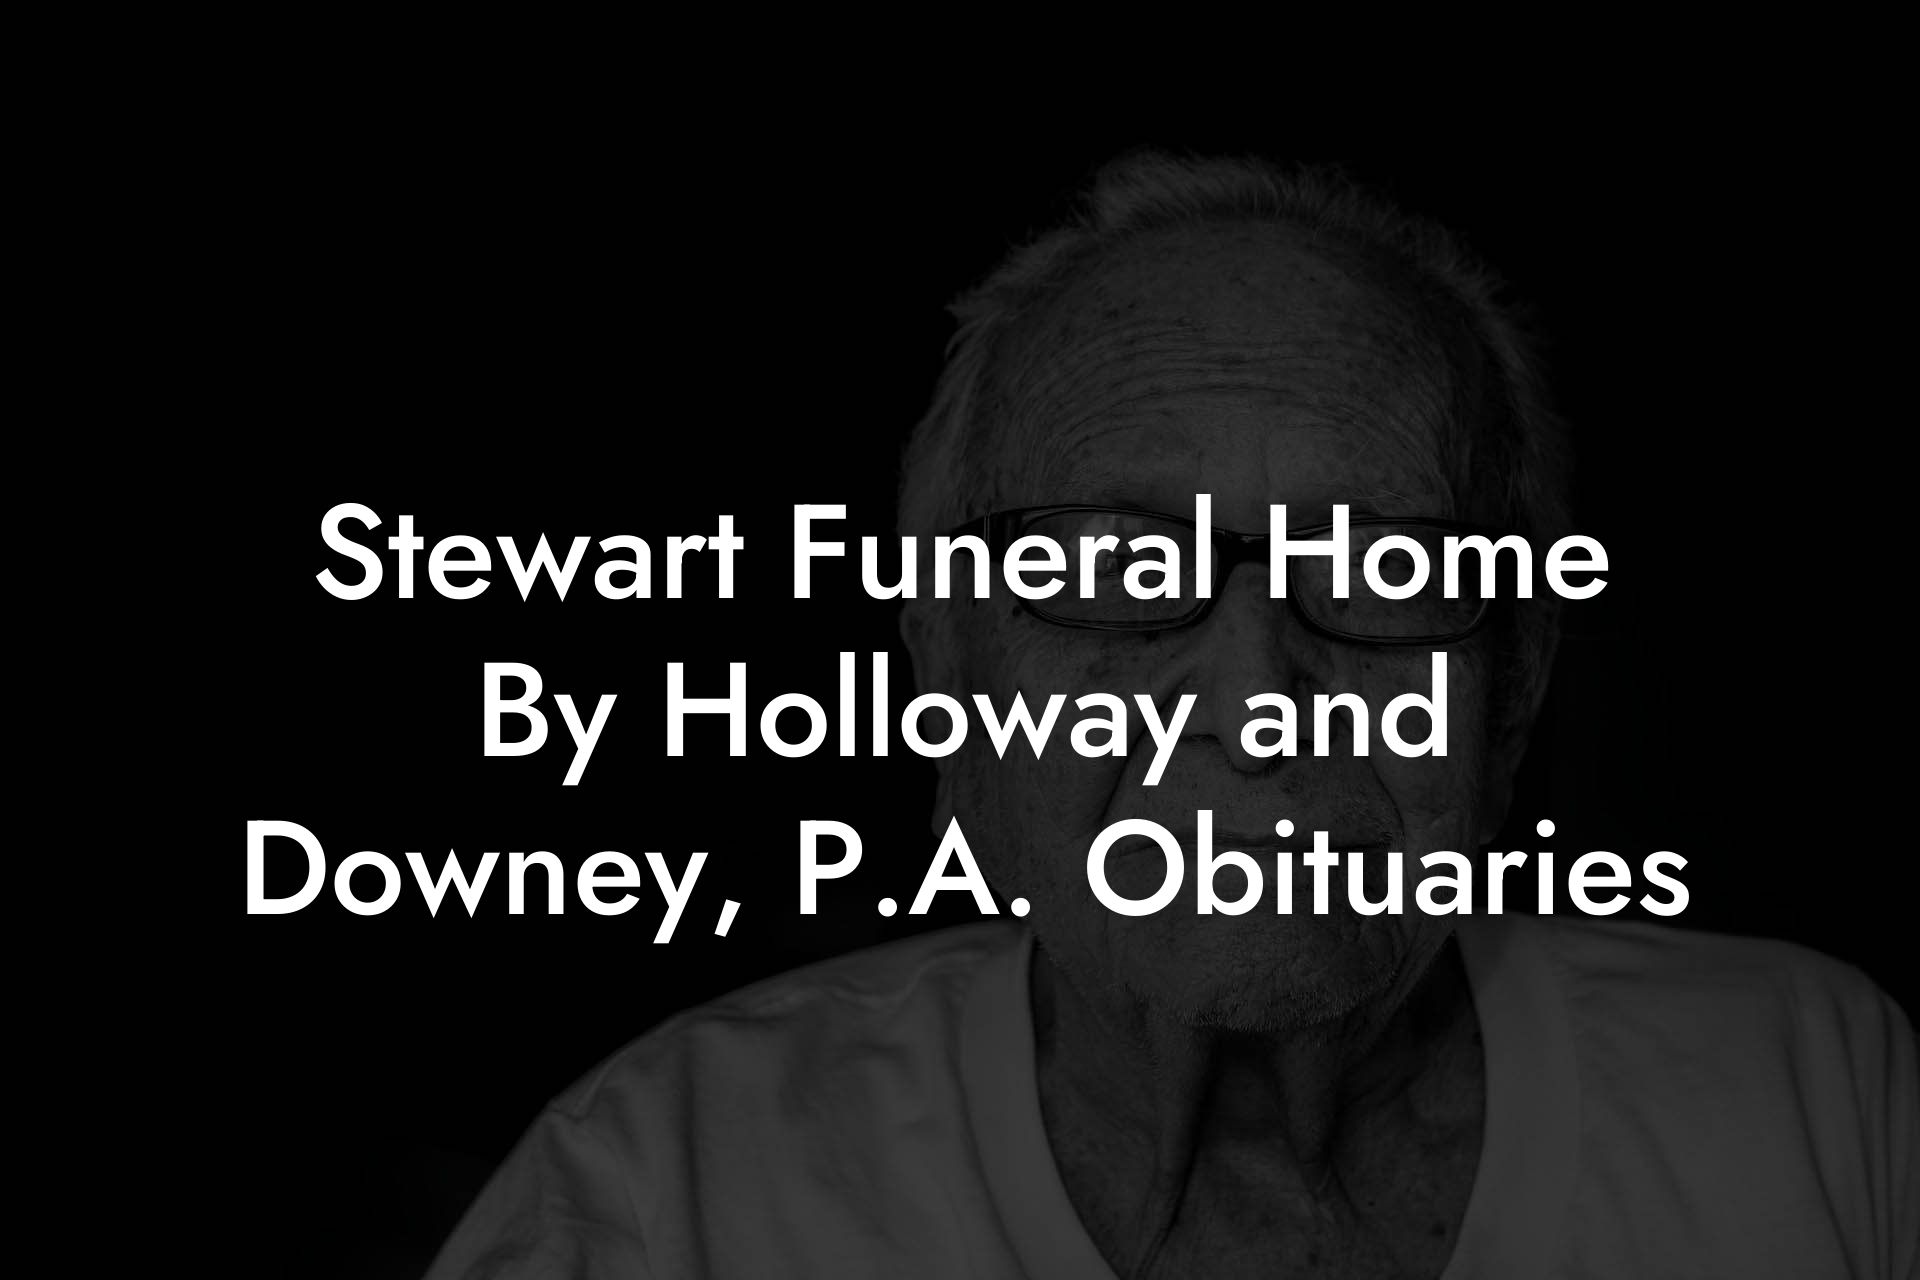 Stewart Funeral Home By Holloway and Downey, P.A. Obituaries